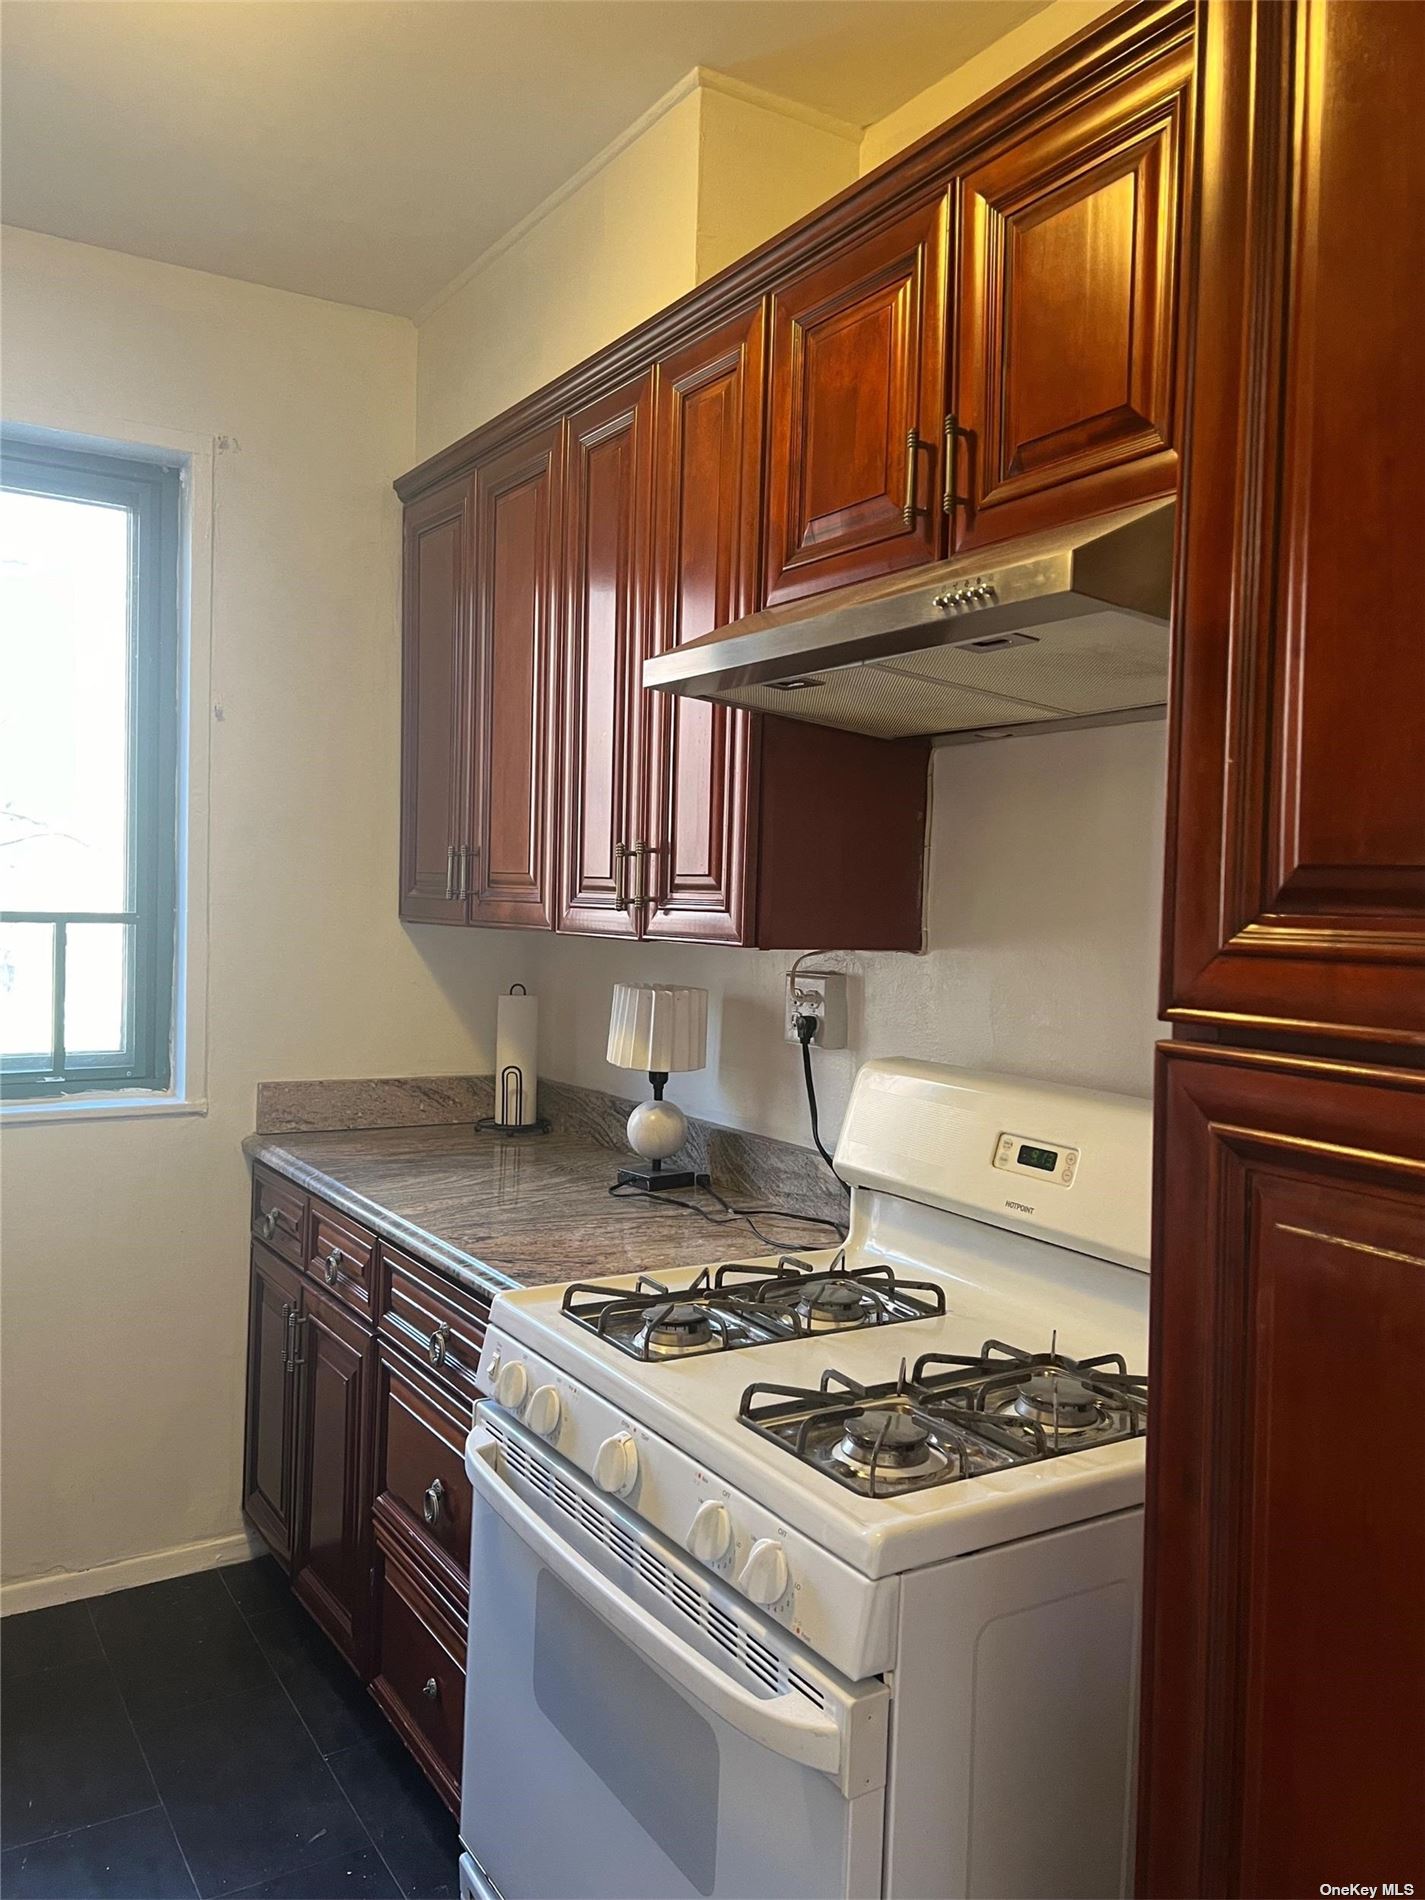 a kitchen with granite countertop stainless steel appliances stove top oven and cabinets